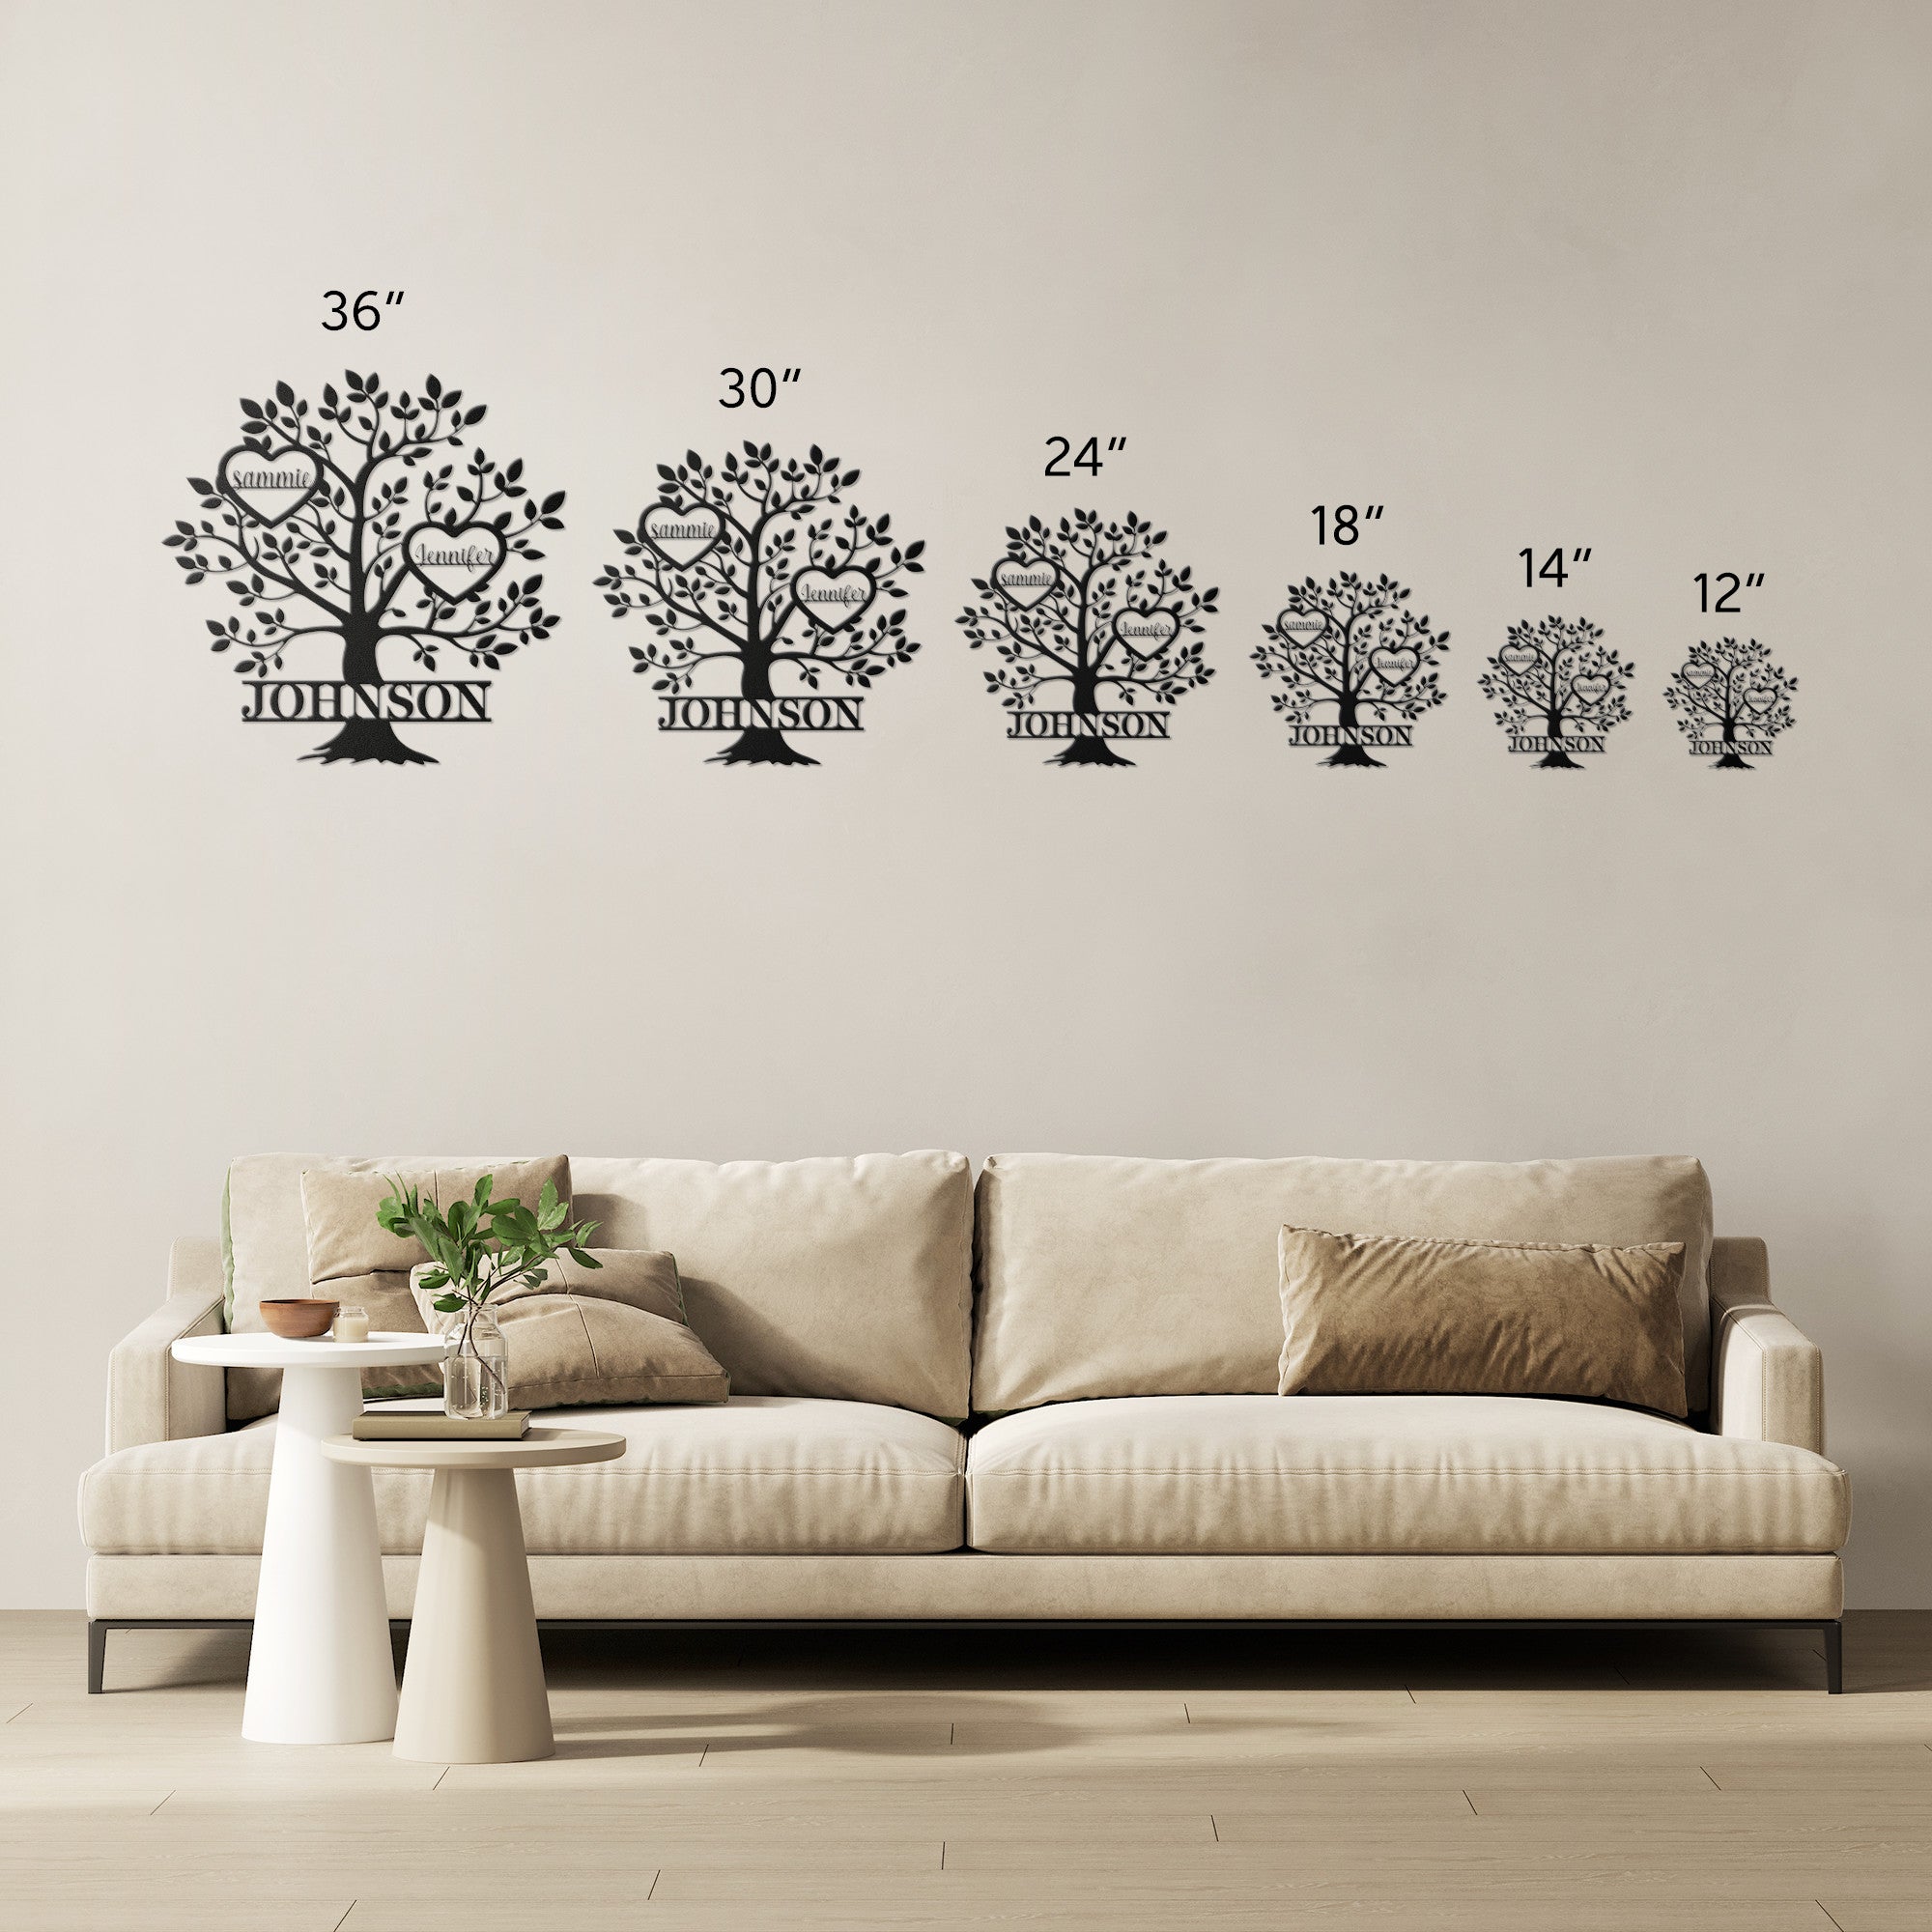 Personalized Family Tree Metal Sign - Cool Metal Signs